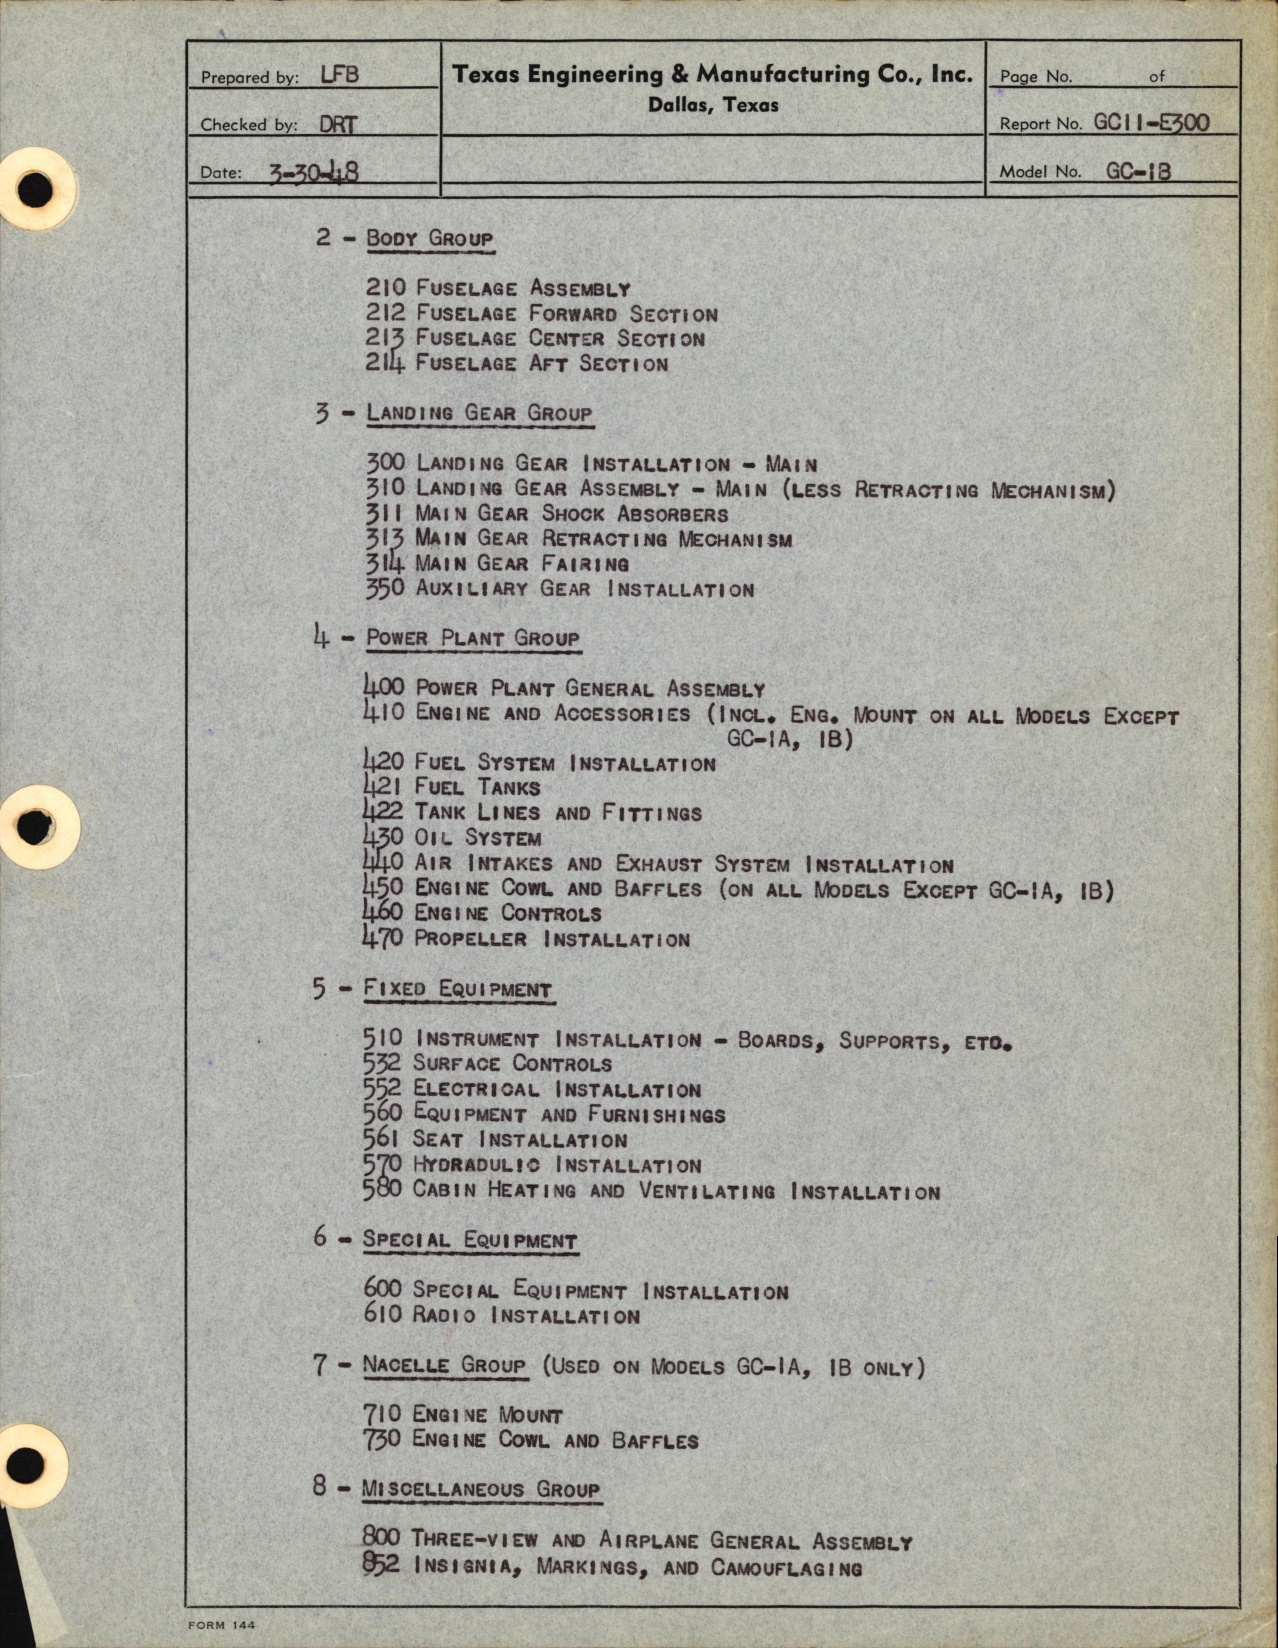 Sample page 5 from AirCorps Library document: Drawing List for GC-1B (3501 & Subs)